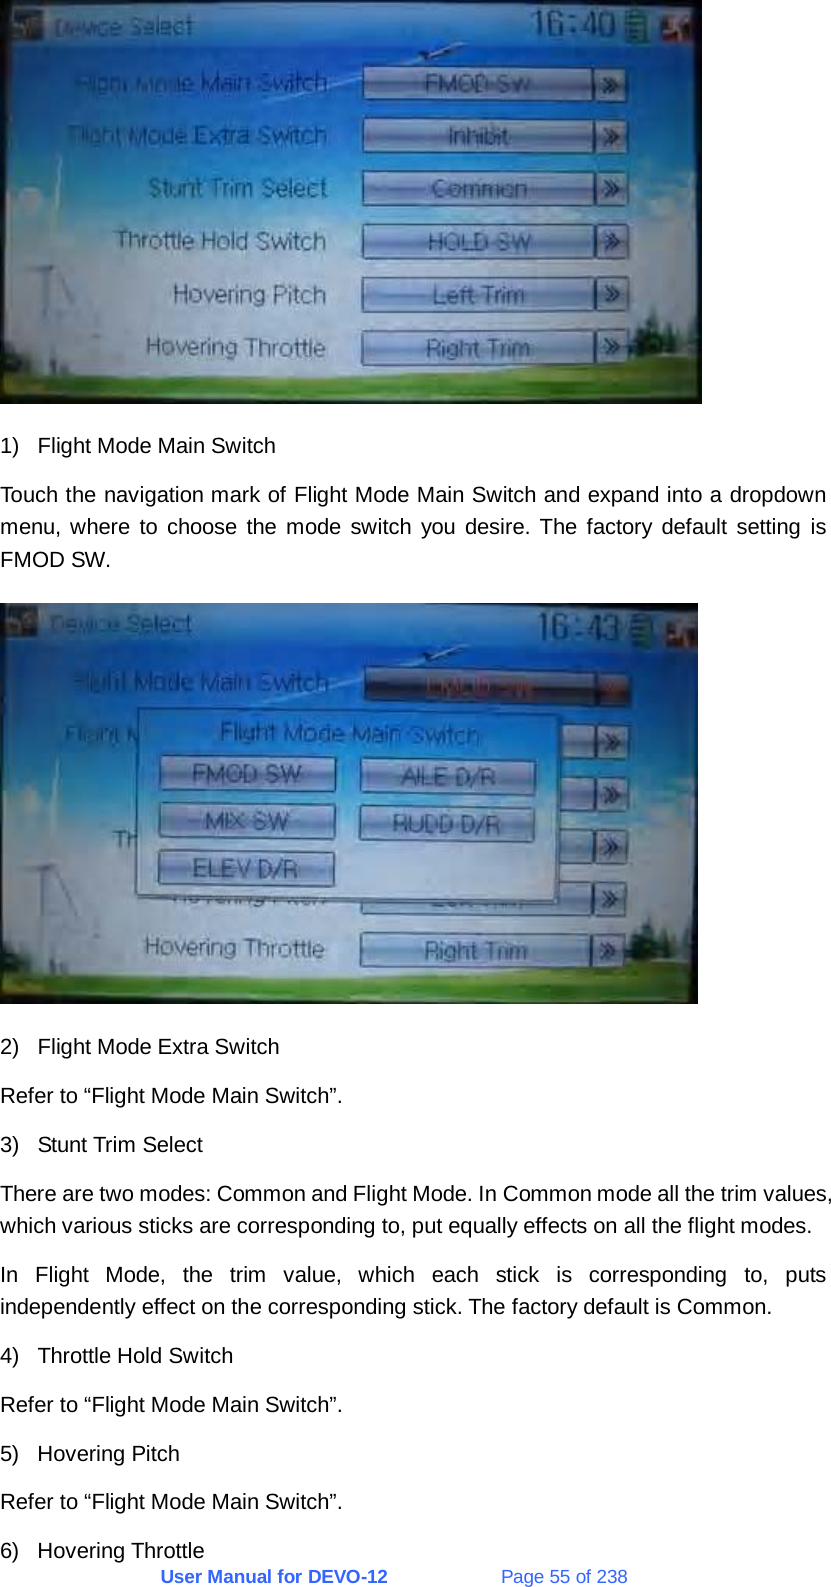 User Manual for DEVO-12             Page 55 of 238  1)  Flight Mode Main Switch Touch the navigation mark of Flight Mode Main Switch and expand into a dropdown menu, where to choose the mode switch you desire. The factory default setting is FMOD SW.  2)  Flight Mode Extra Switch Refer to “Flight Mode Main Switch”. 3)  Stunt Trim Select There are two modes: Common and Flight Mode. In Common mode all the trim values, which various sticks are corresponding to, put equally effects on all the flight modes. In Flight Mode, the trim value, which each stick is corresponding to, puts independently effect on the corresponding stick. The factory default is Common. 4)  Throttle Hold Switch Refer to “Flight Mode Main Switch”. 5) Hovering Pitch Refer to “Flight Mode Main Switch”. 6) Hovering Throttle 